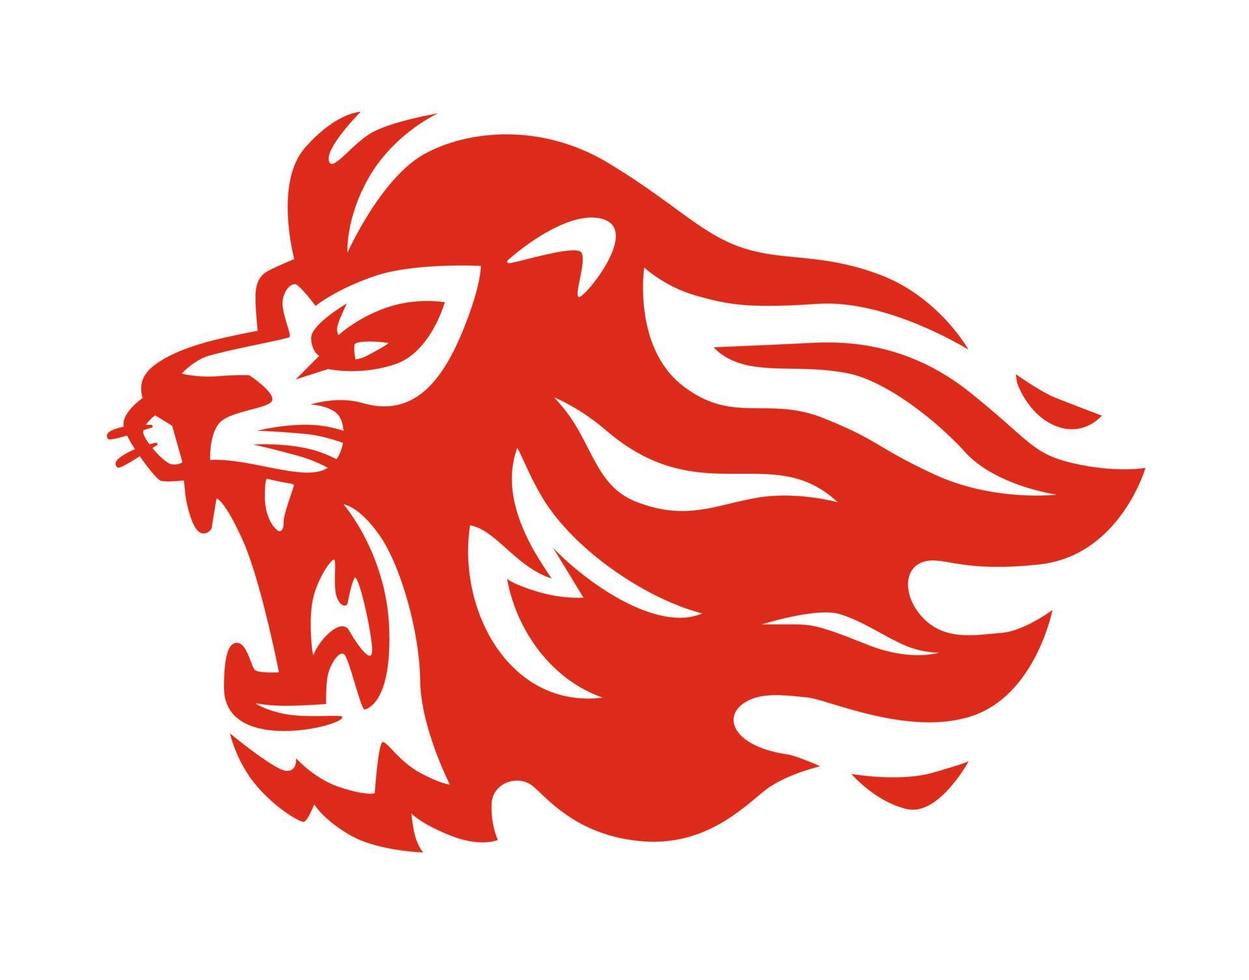 Lion fire flame red. vector